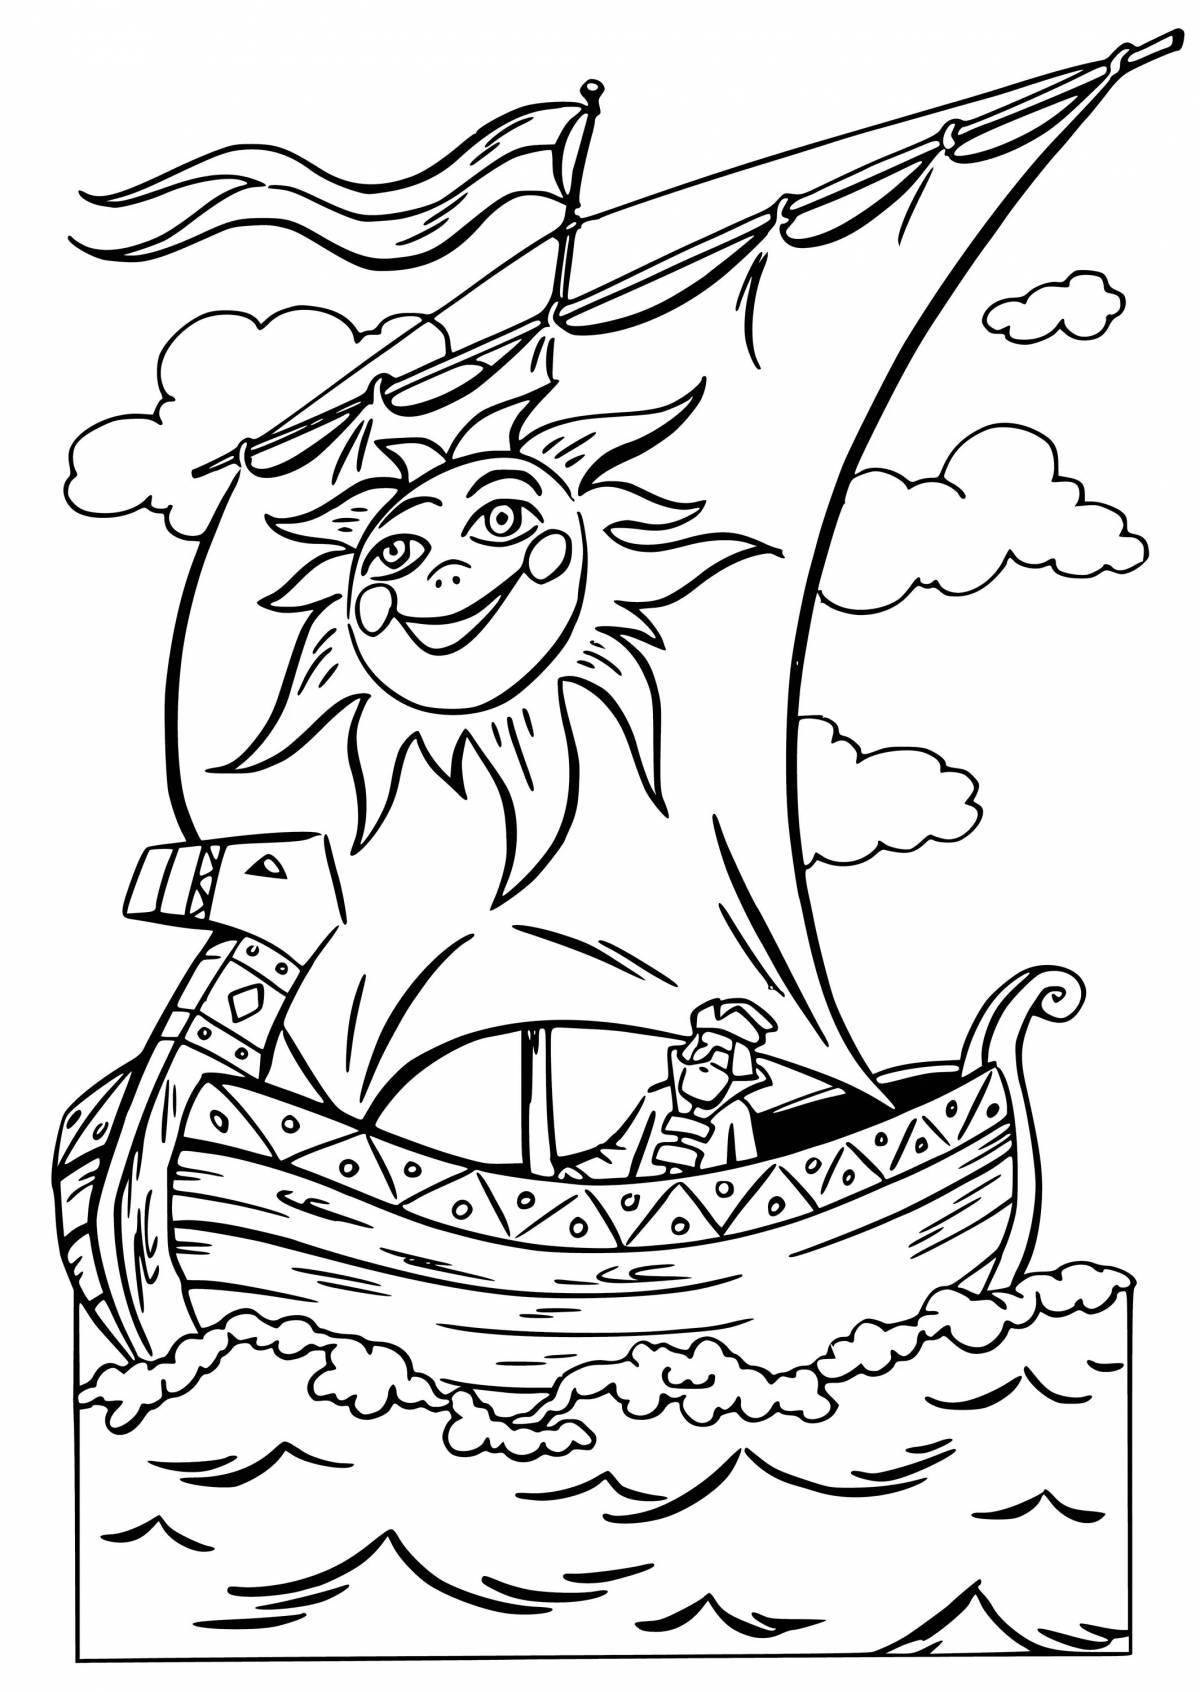 Sadko's dazzling coloring book and the king of the sea